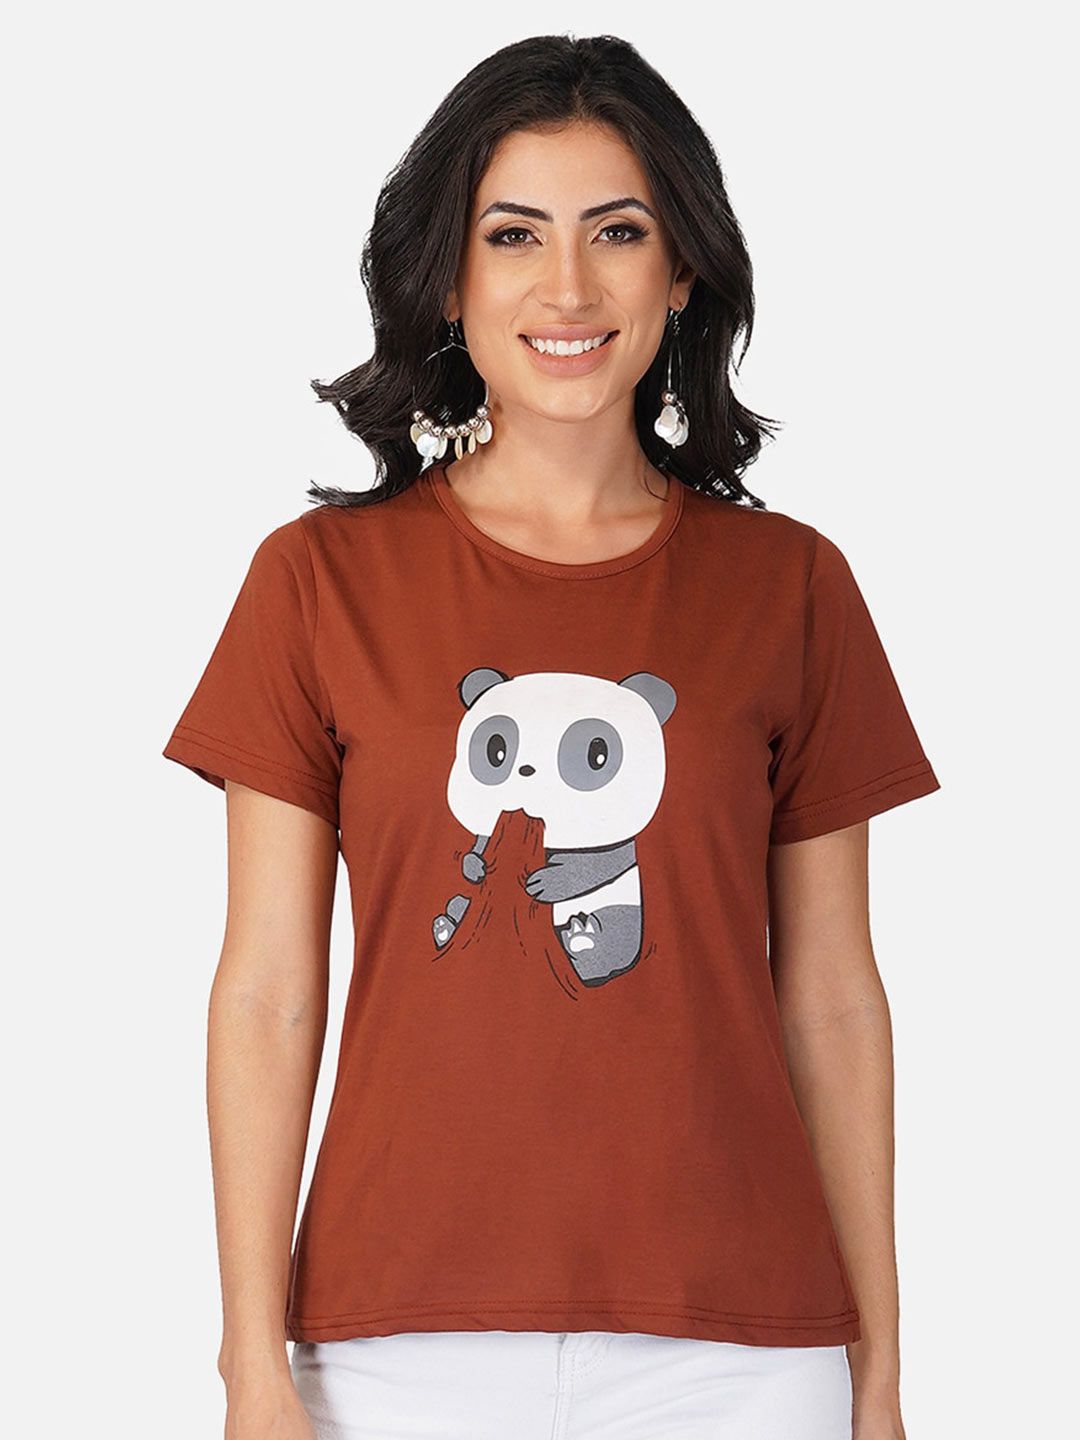 BASE 41 Graphic Printed Round Neck Slim Fit T-shirt Price in India